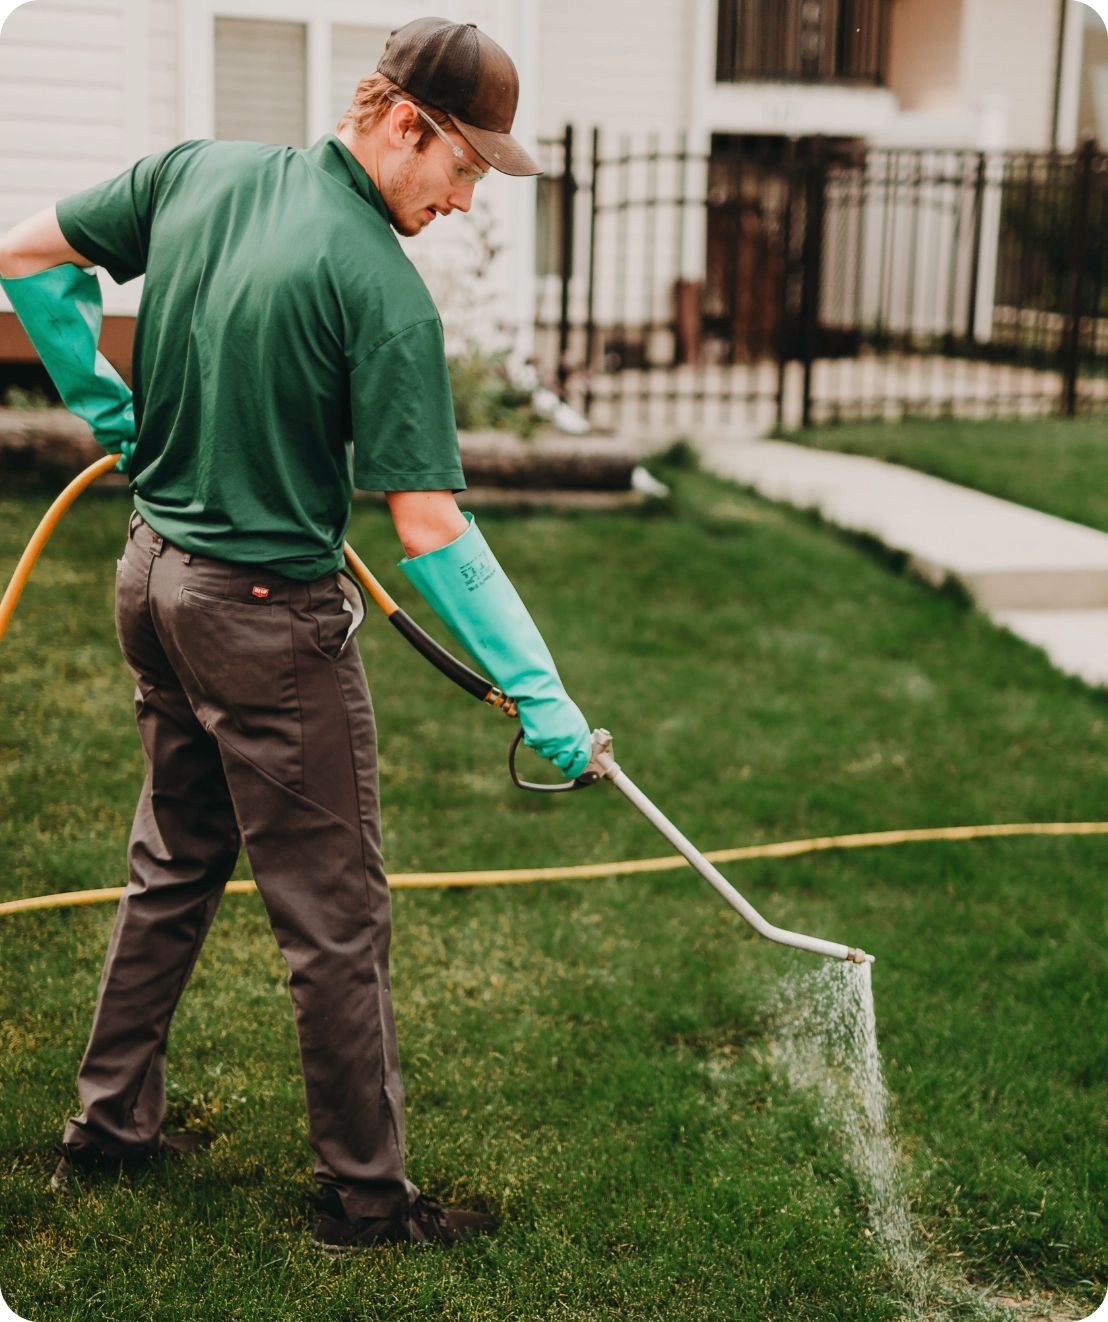 tech (Aidan) sprays weed control on front lawn of home